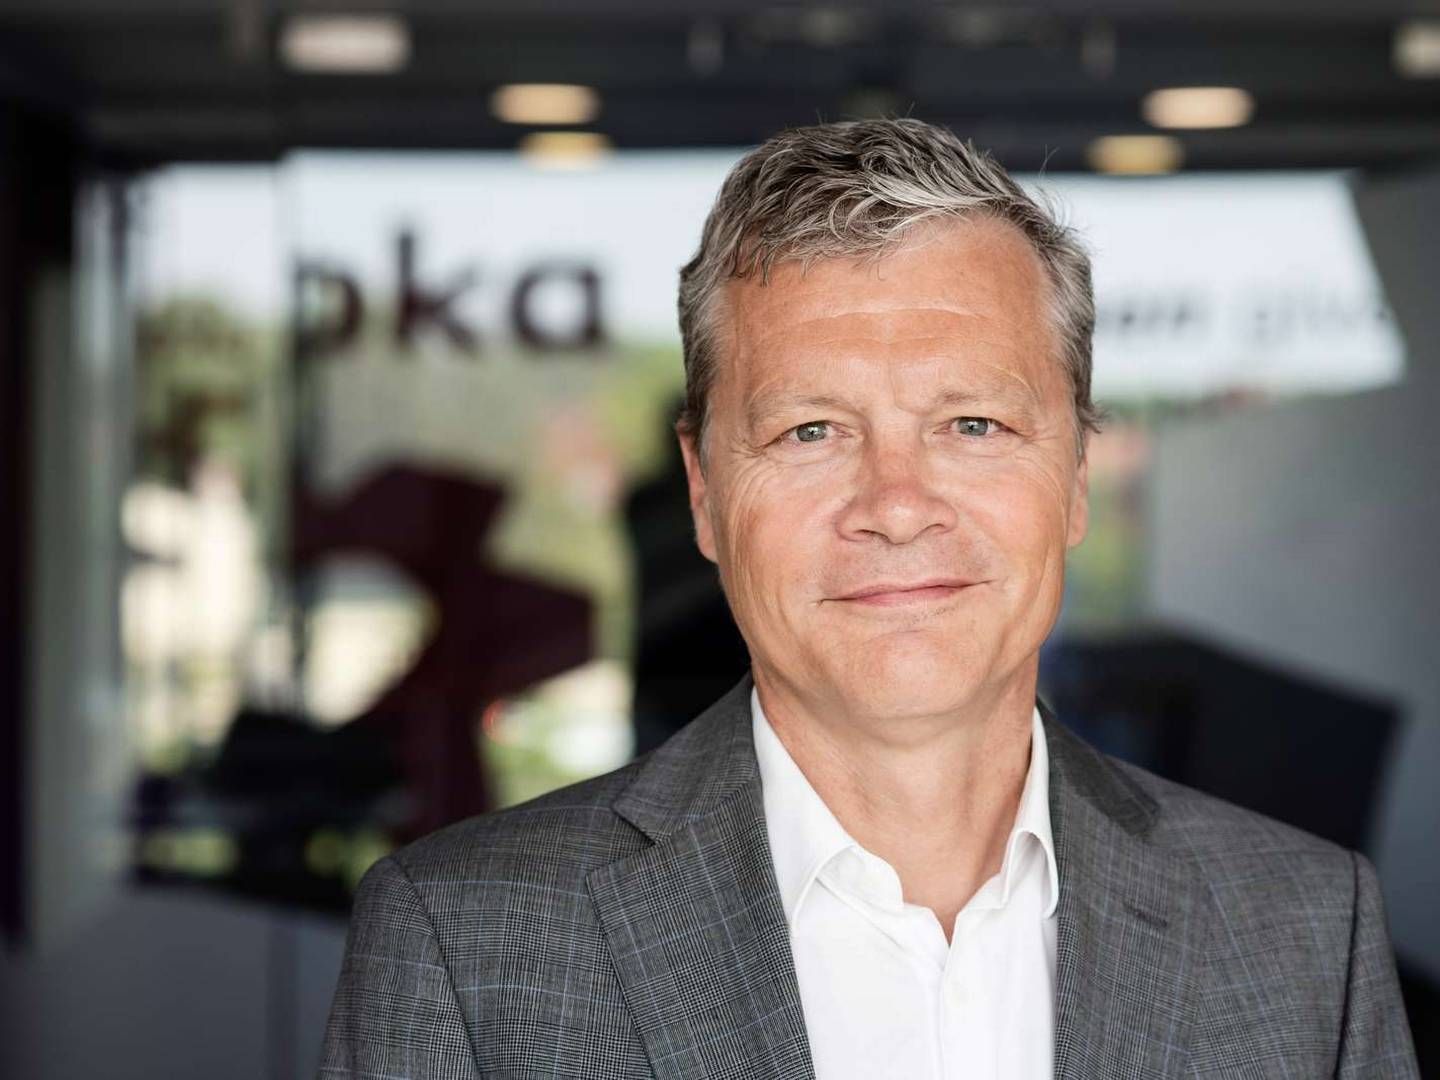 Michael Nellemann Pedersen is the CIO of PKA which manages EUR 38bn on behalf of 355,000 members primarily working in social services and health care. | Photo: PR/PKA